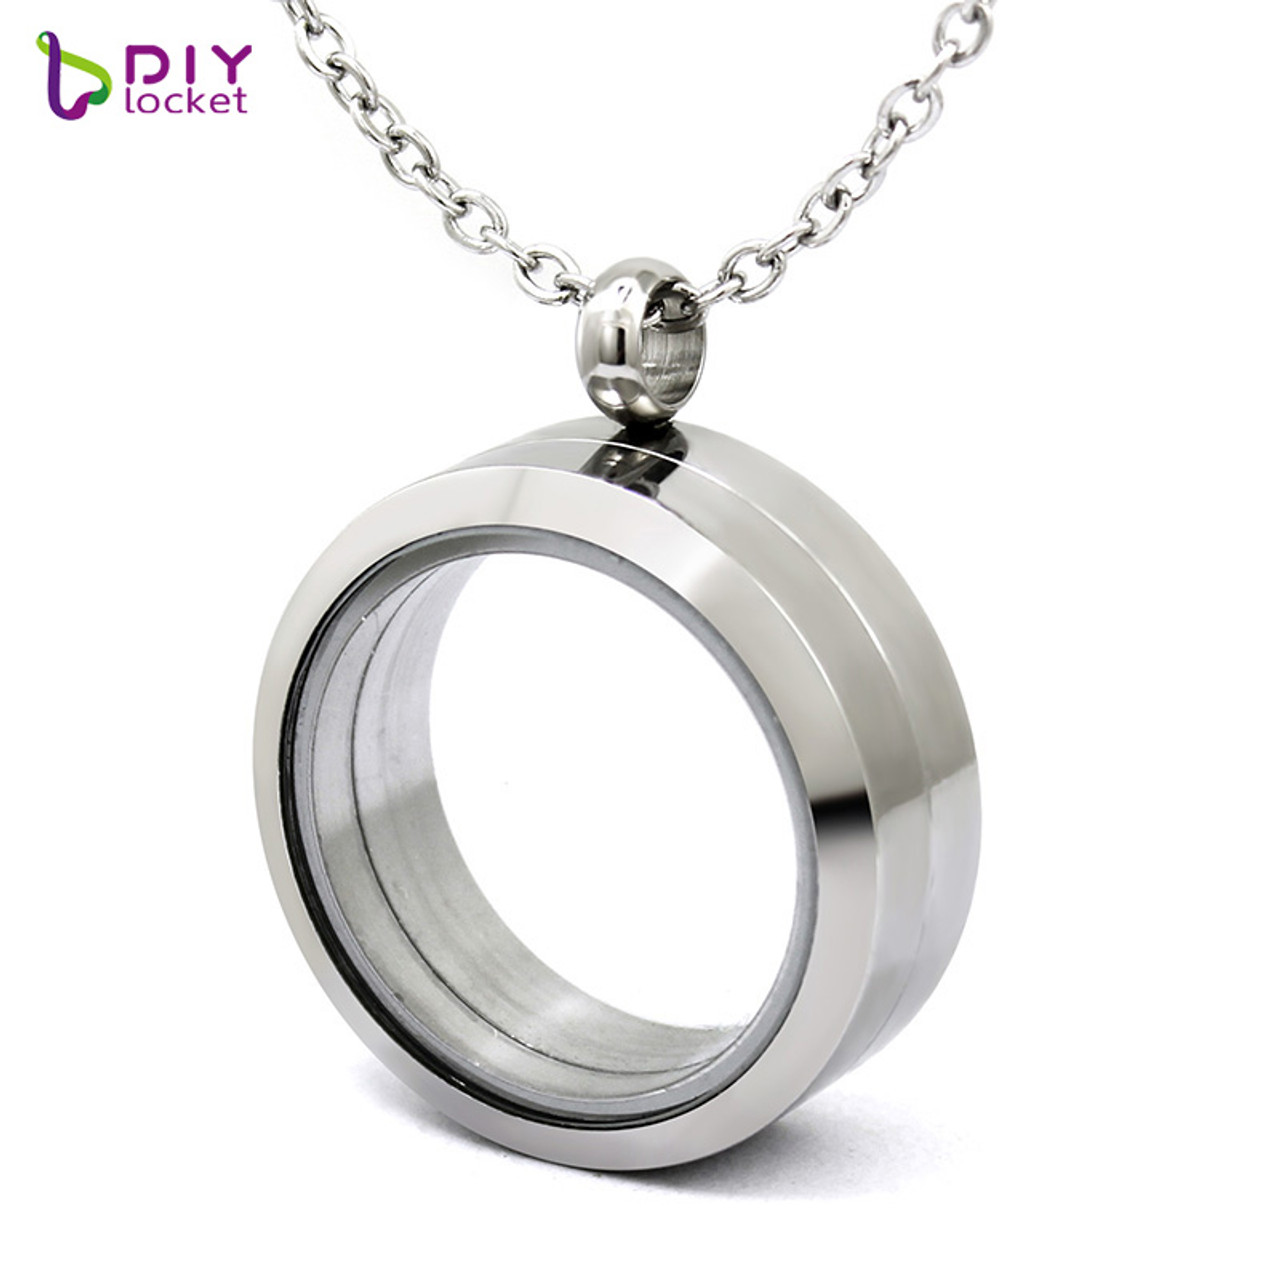  5Pcs/Lot Rhinestone Round 30mm Glass and Stainless Steel Living  Memory Locket Bracelet Aroma Locket Fit Perfume Jewelry - (Metal Color:  L117-2Steel Navy) : Clothing, Shoes & Jewelry